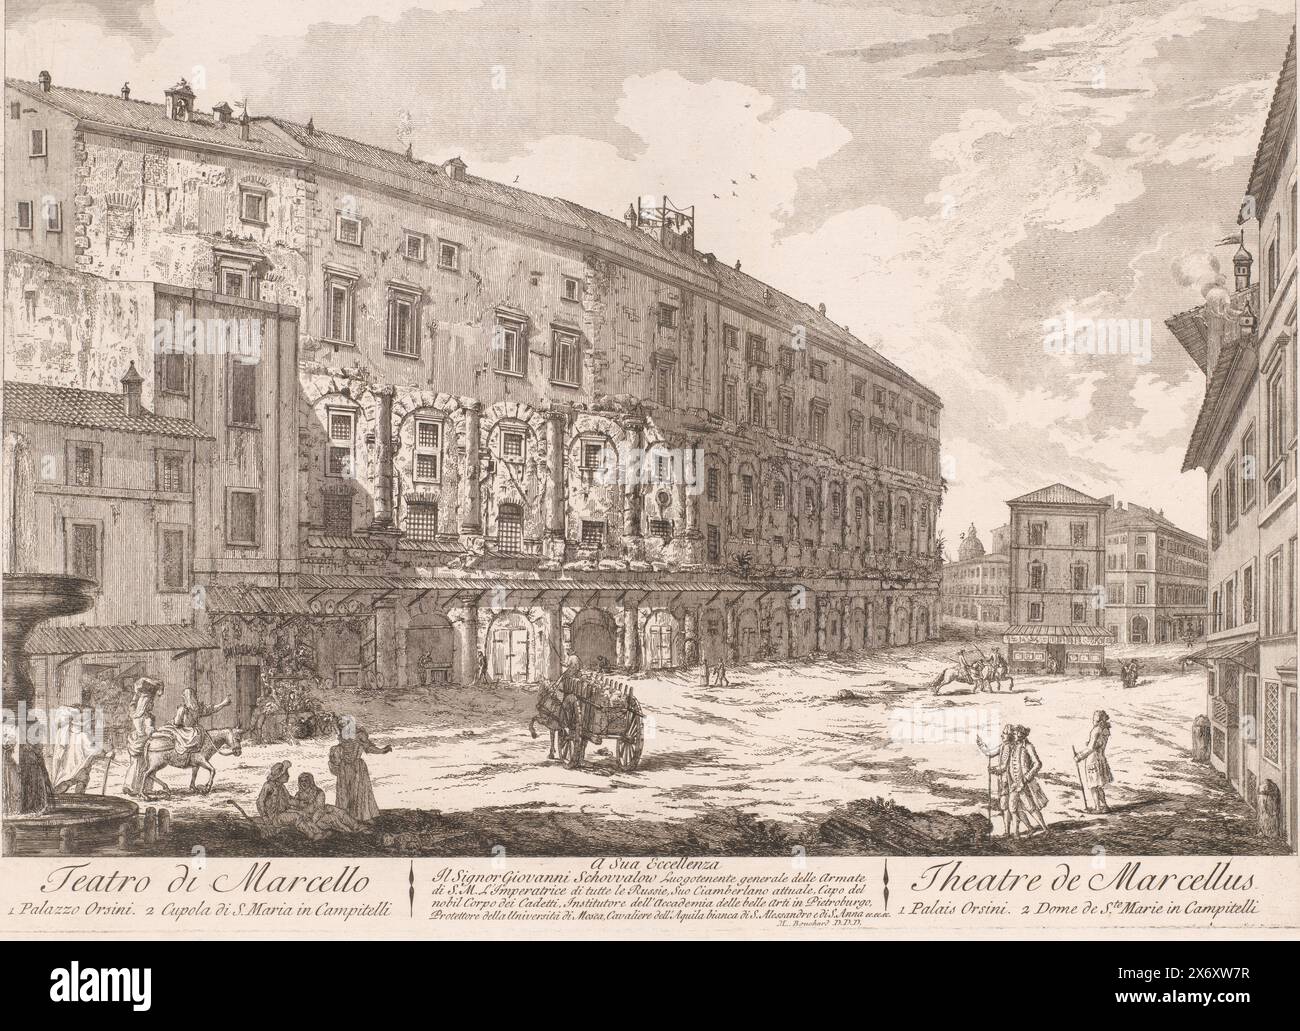 View of the Theater of Marcellus, Teatro di Marcello / Theater de Marcellus (title on object), print, print maker: Jean Barbault, (attributed to), publisher: J. Bouchard & J.J. Gravier, J. Bouchard & J.J. Gravier, (mentioned on object), print maker: France, publisher: Rome, 1761, paper, etching, height, 395 mm × width, 550 mm Stock Photo